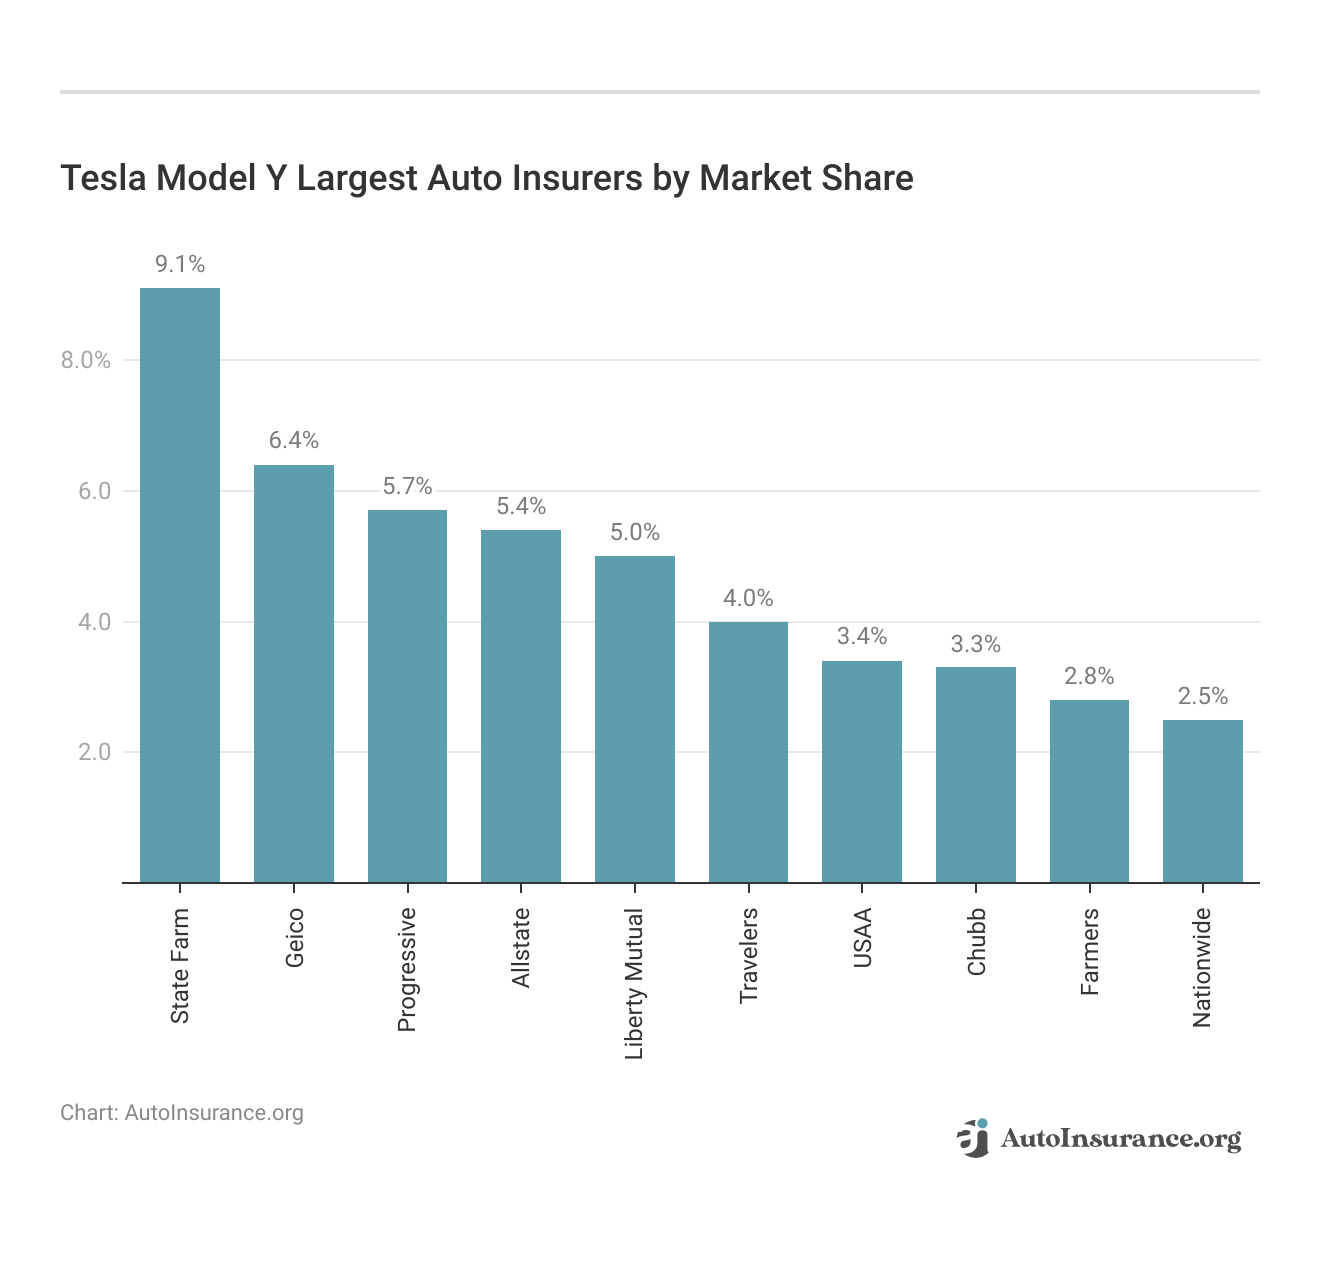 <h3>Tesla Model Y Largest Auto Insurers by Market Share</h3>